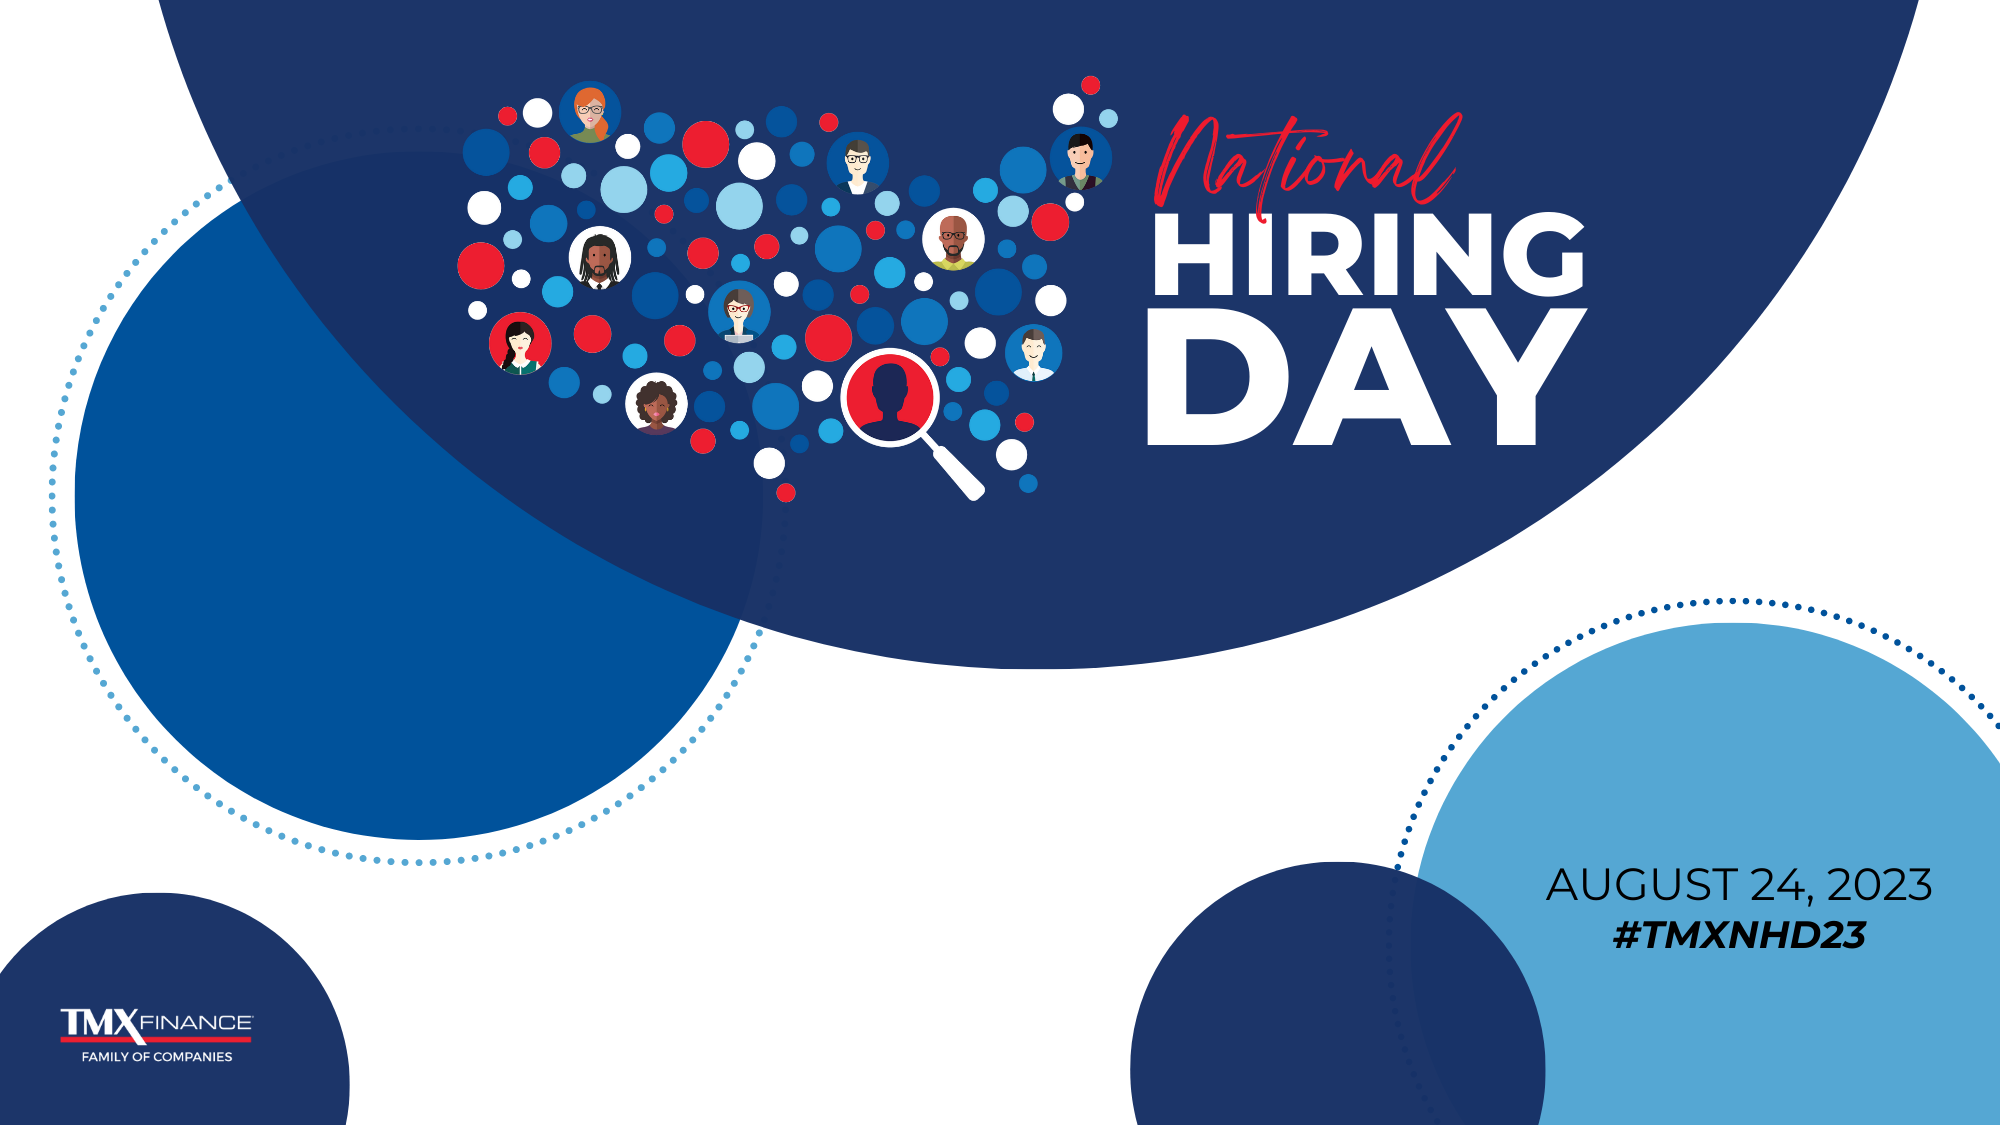 National Hiring Day – Experience Our Culture of Growth